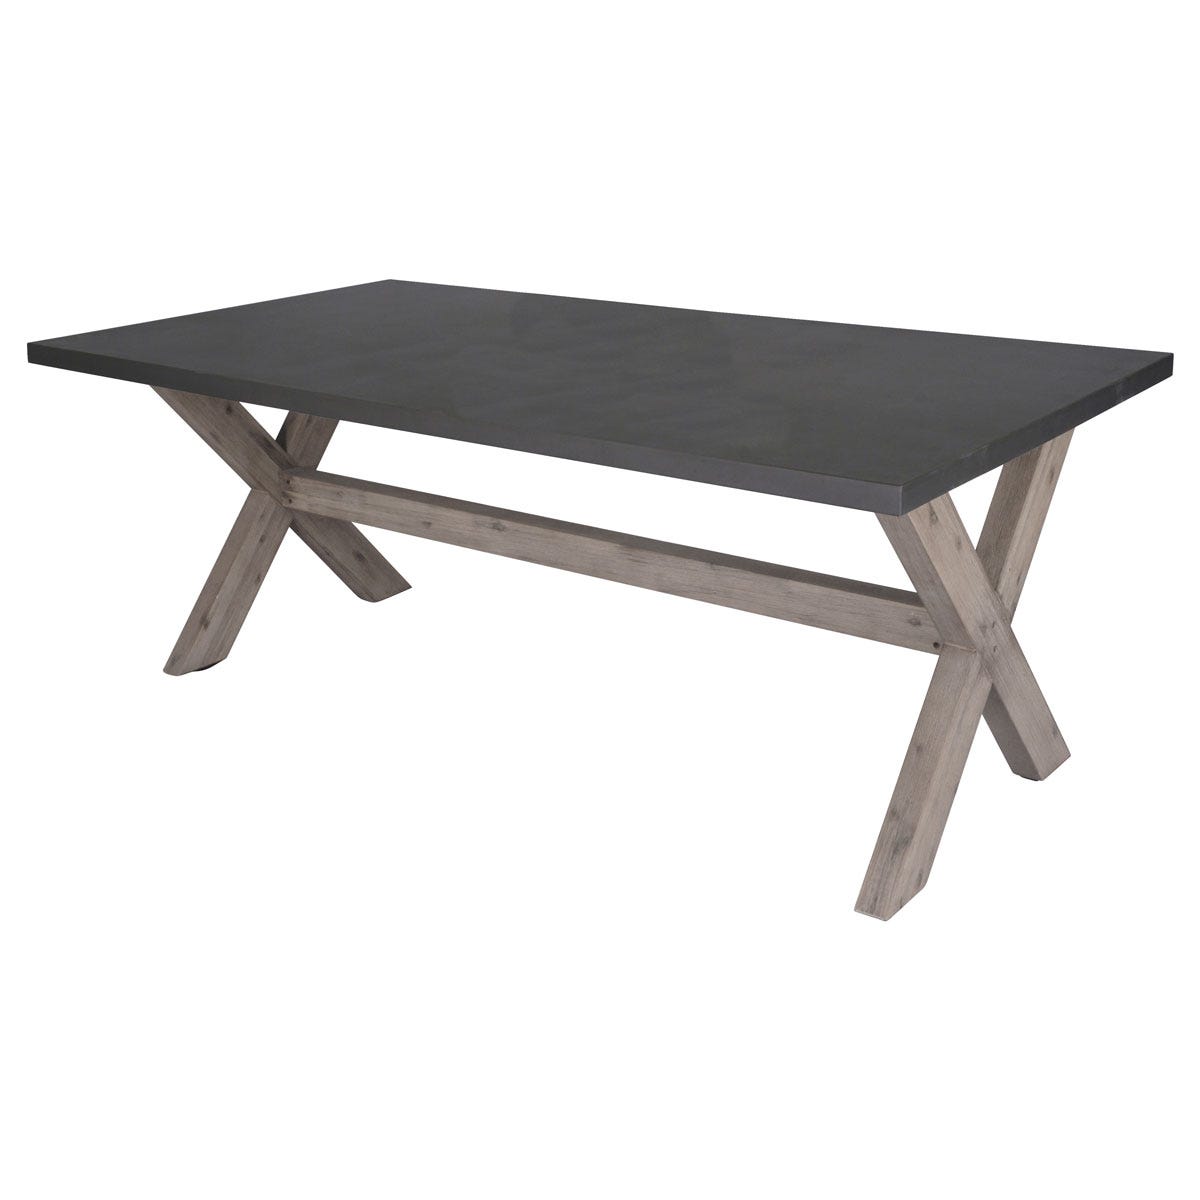 Charles Bentley Fibre Cement Wood Rectangular Dining Table